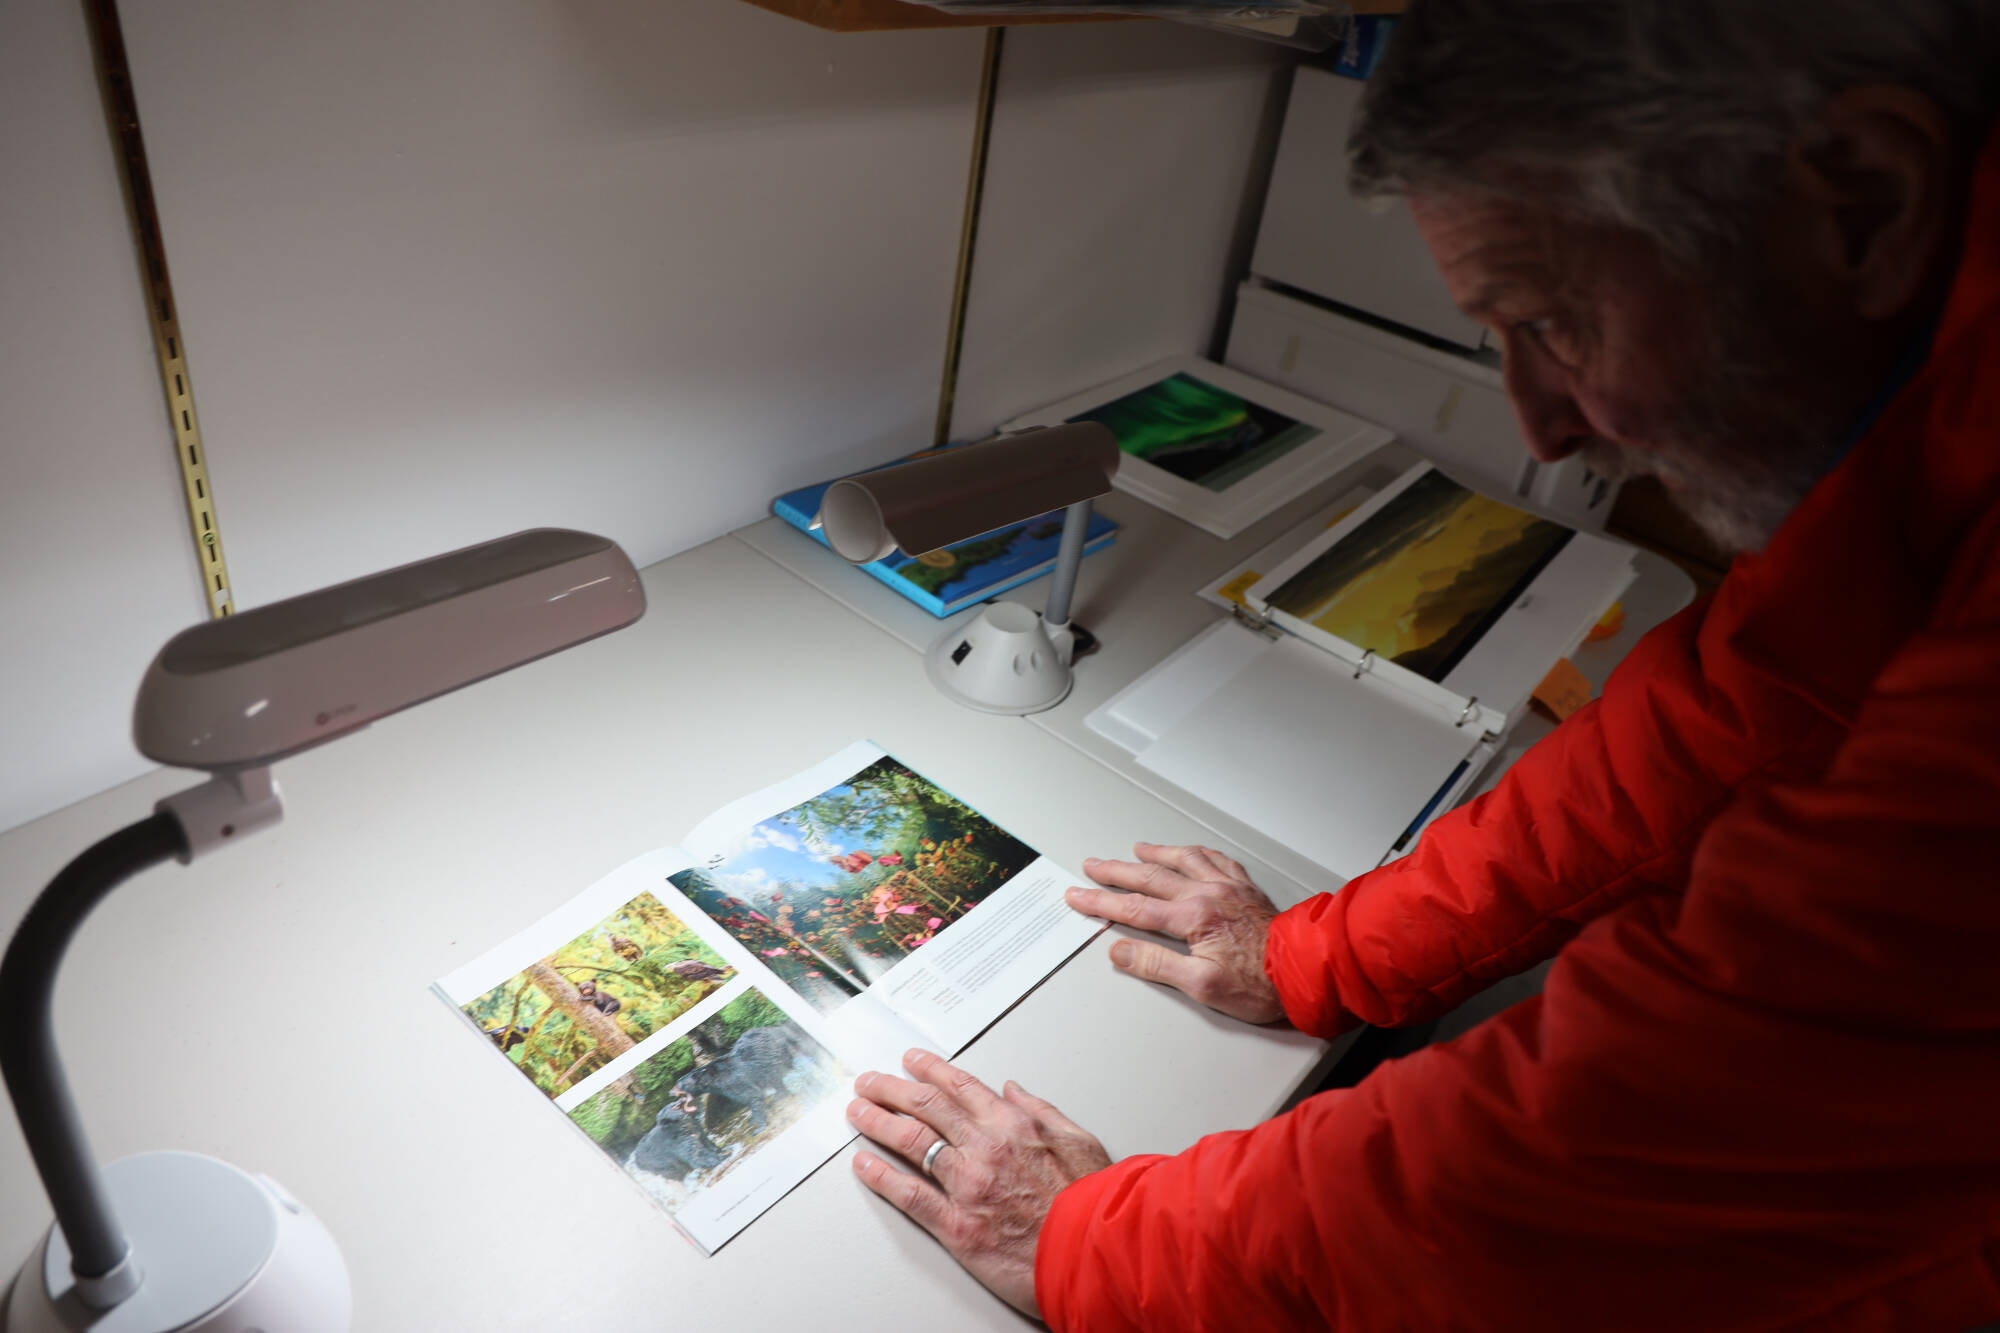 Mark Kelley analyses some of his photos that were featured in the print edition of the 2022 National Wildlife Magazine photo contest edition. Each photo included in his portfolio was closely examined and deliberated on before he settled with the final 10 photos that built the body of work. (Clarise Larson / Juneau Empire)